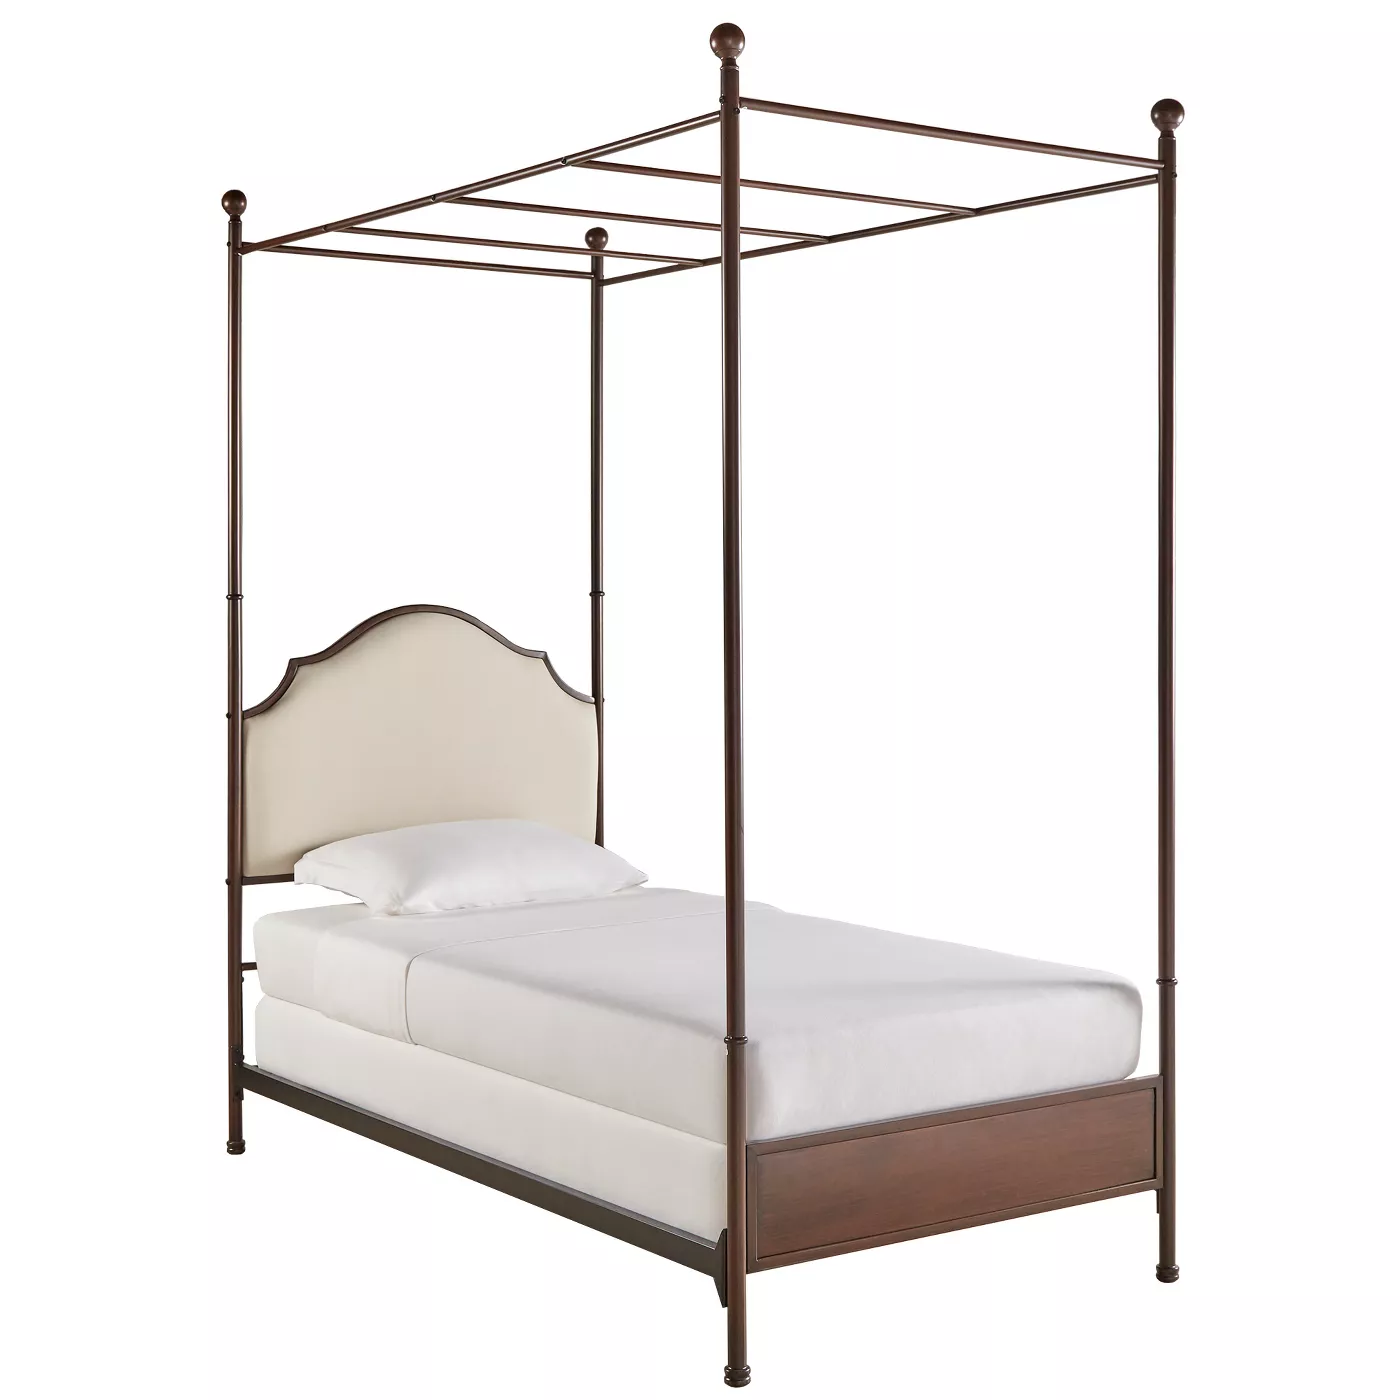 Dullie Curved Top Bed - Poster, Canopy - Inspire Q - image 1 of 2